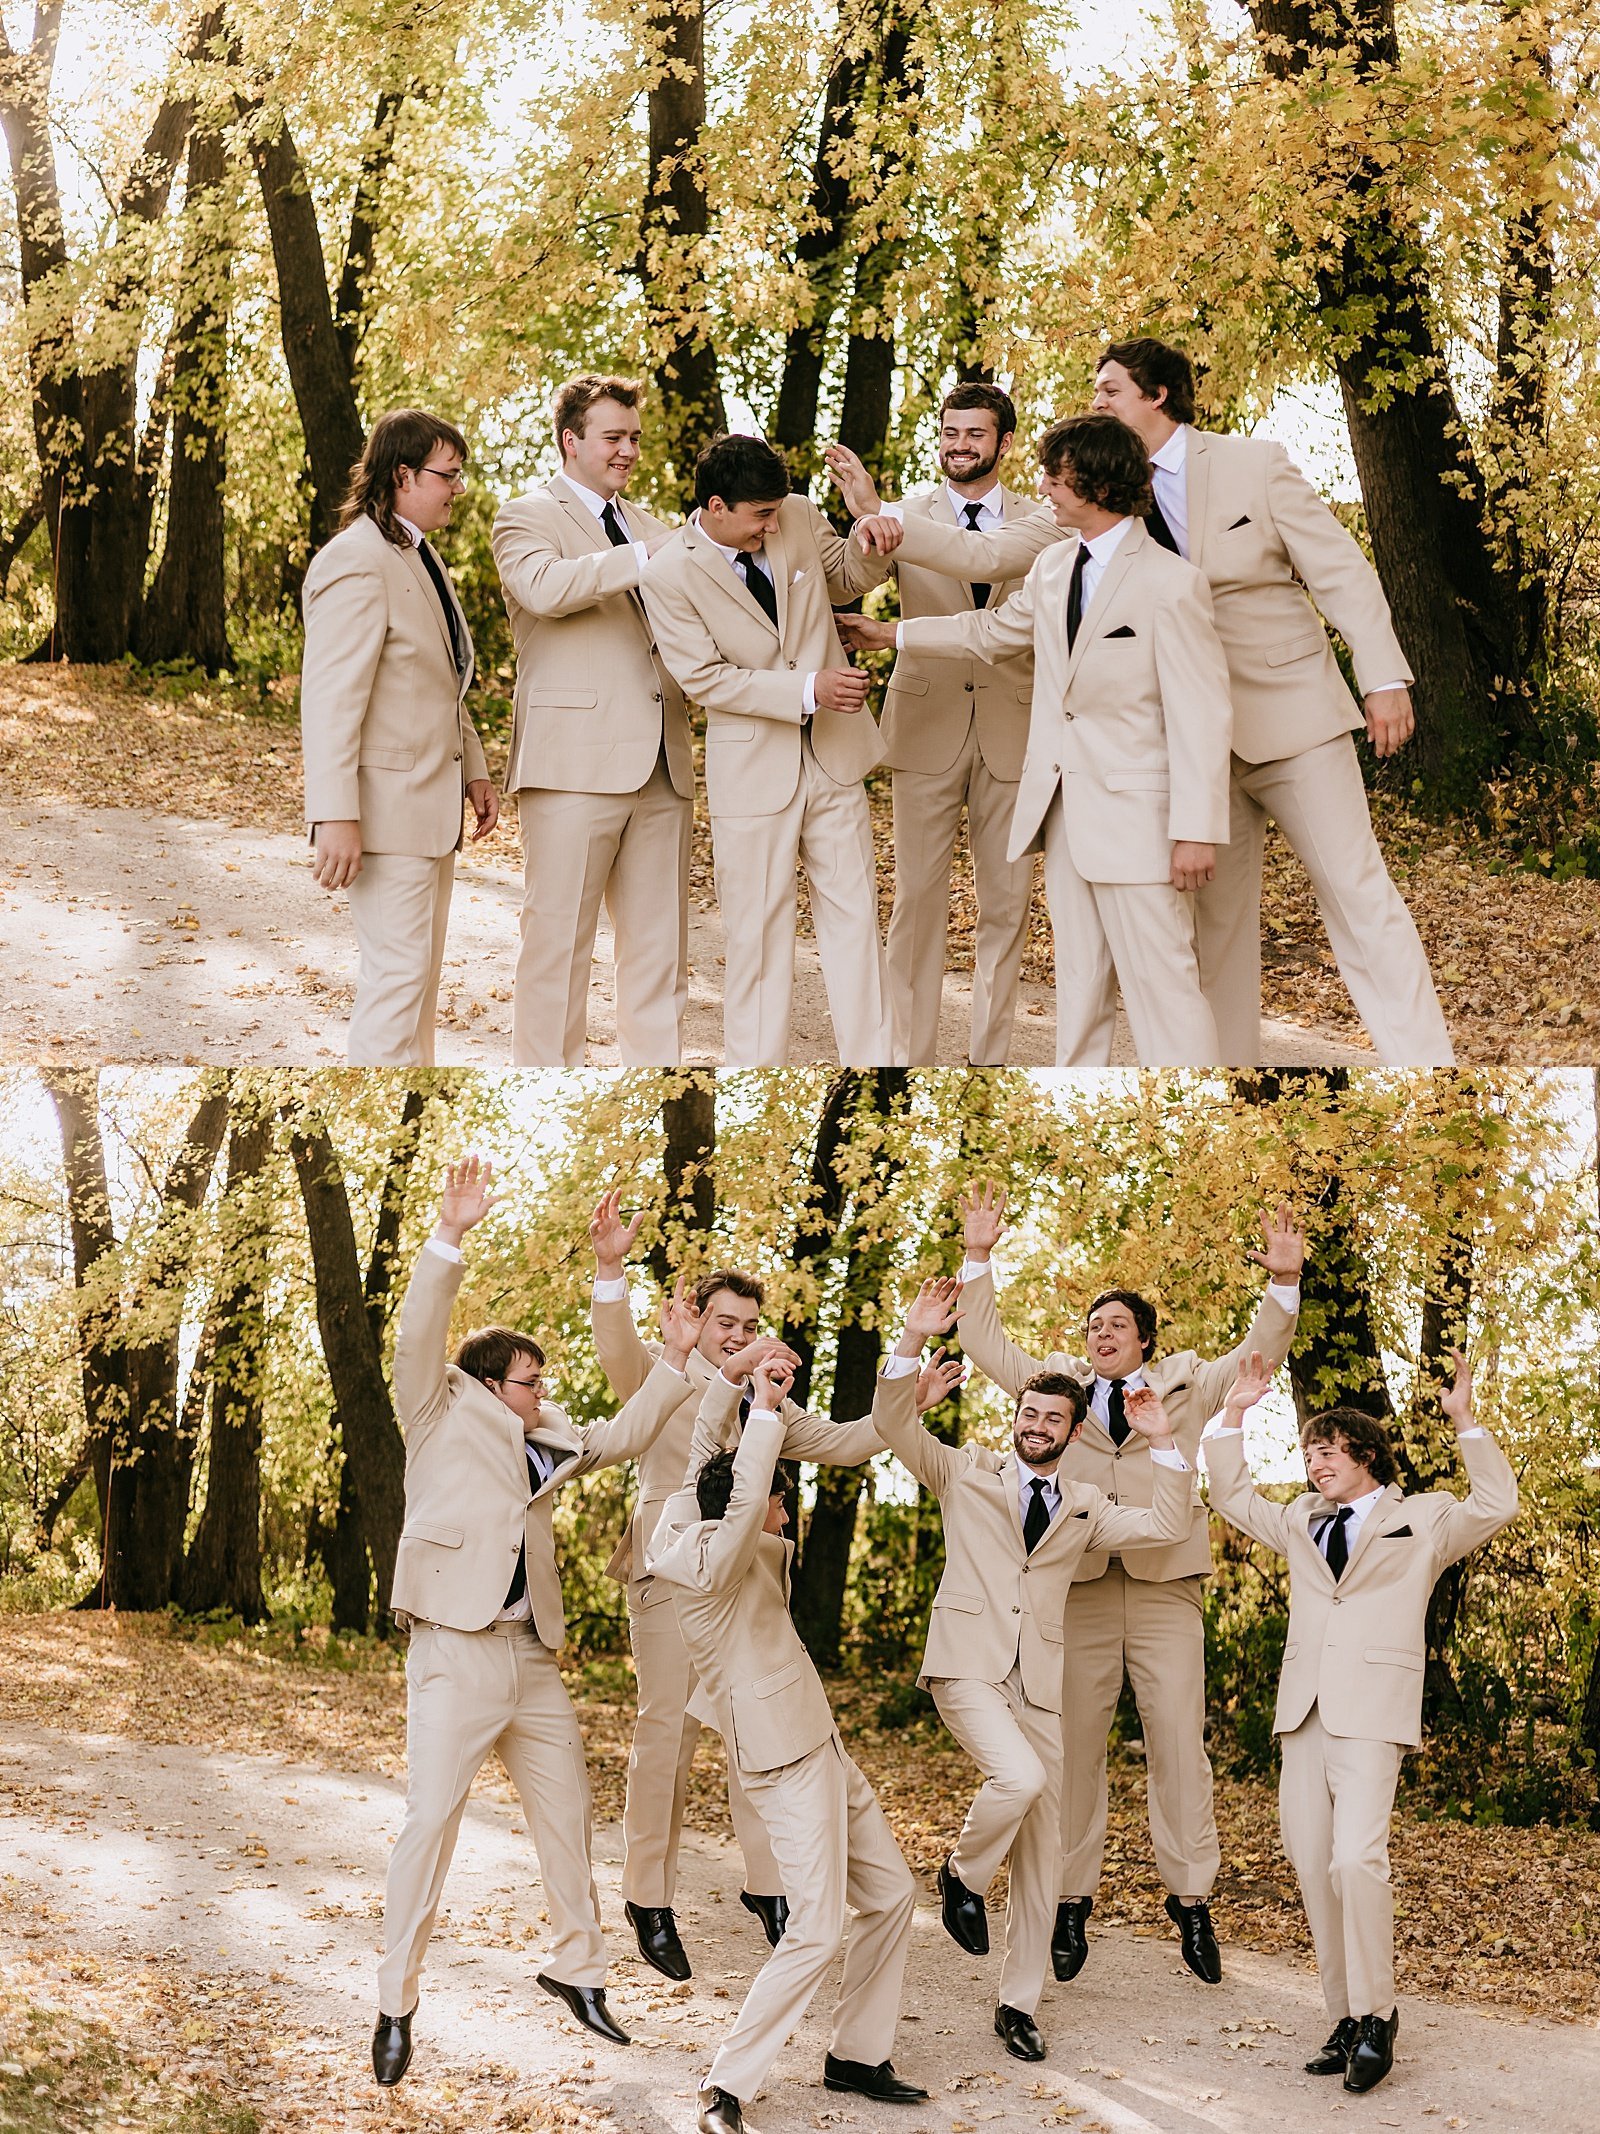  Groomsmen in tan suits celebrating with the groom  outdoors 